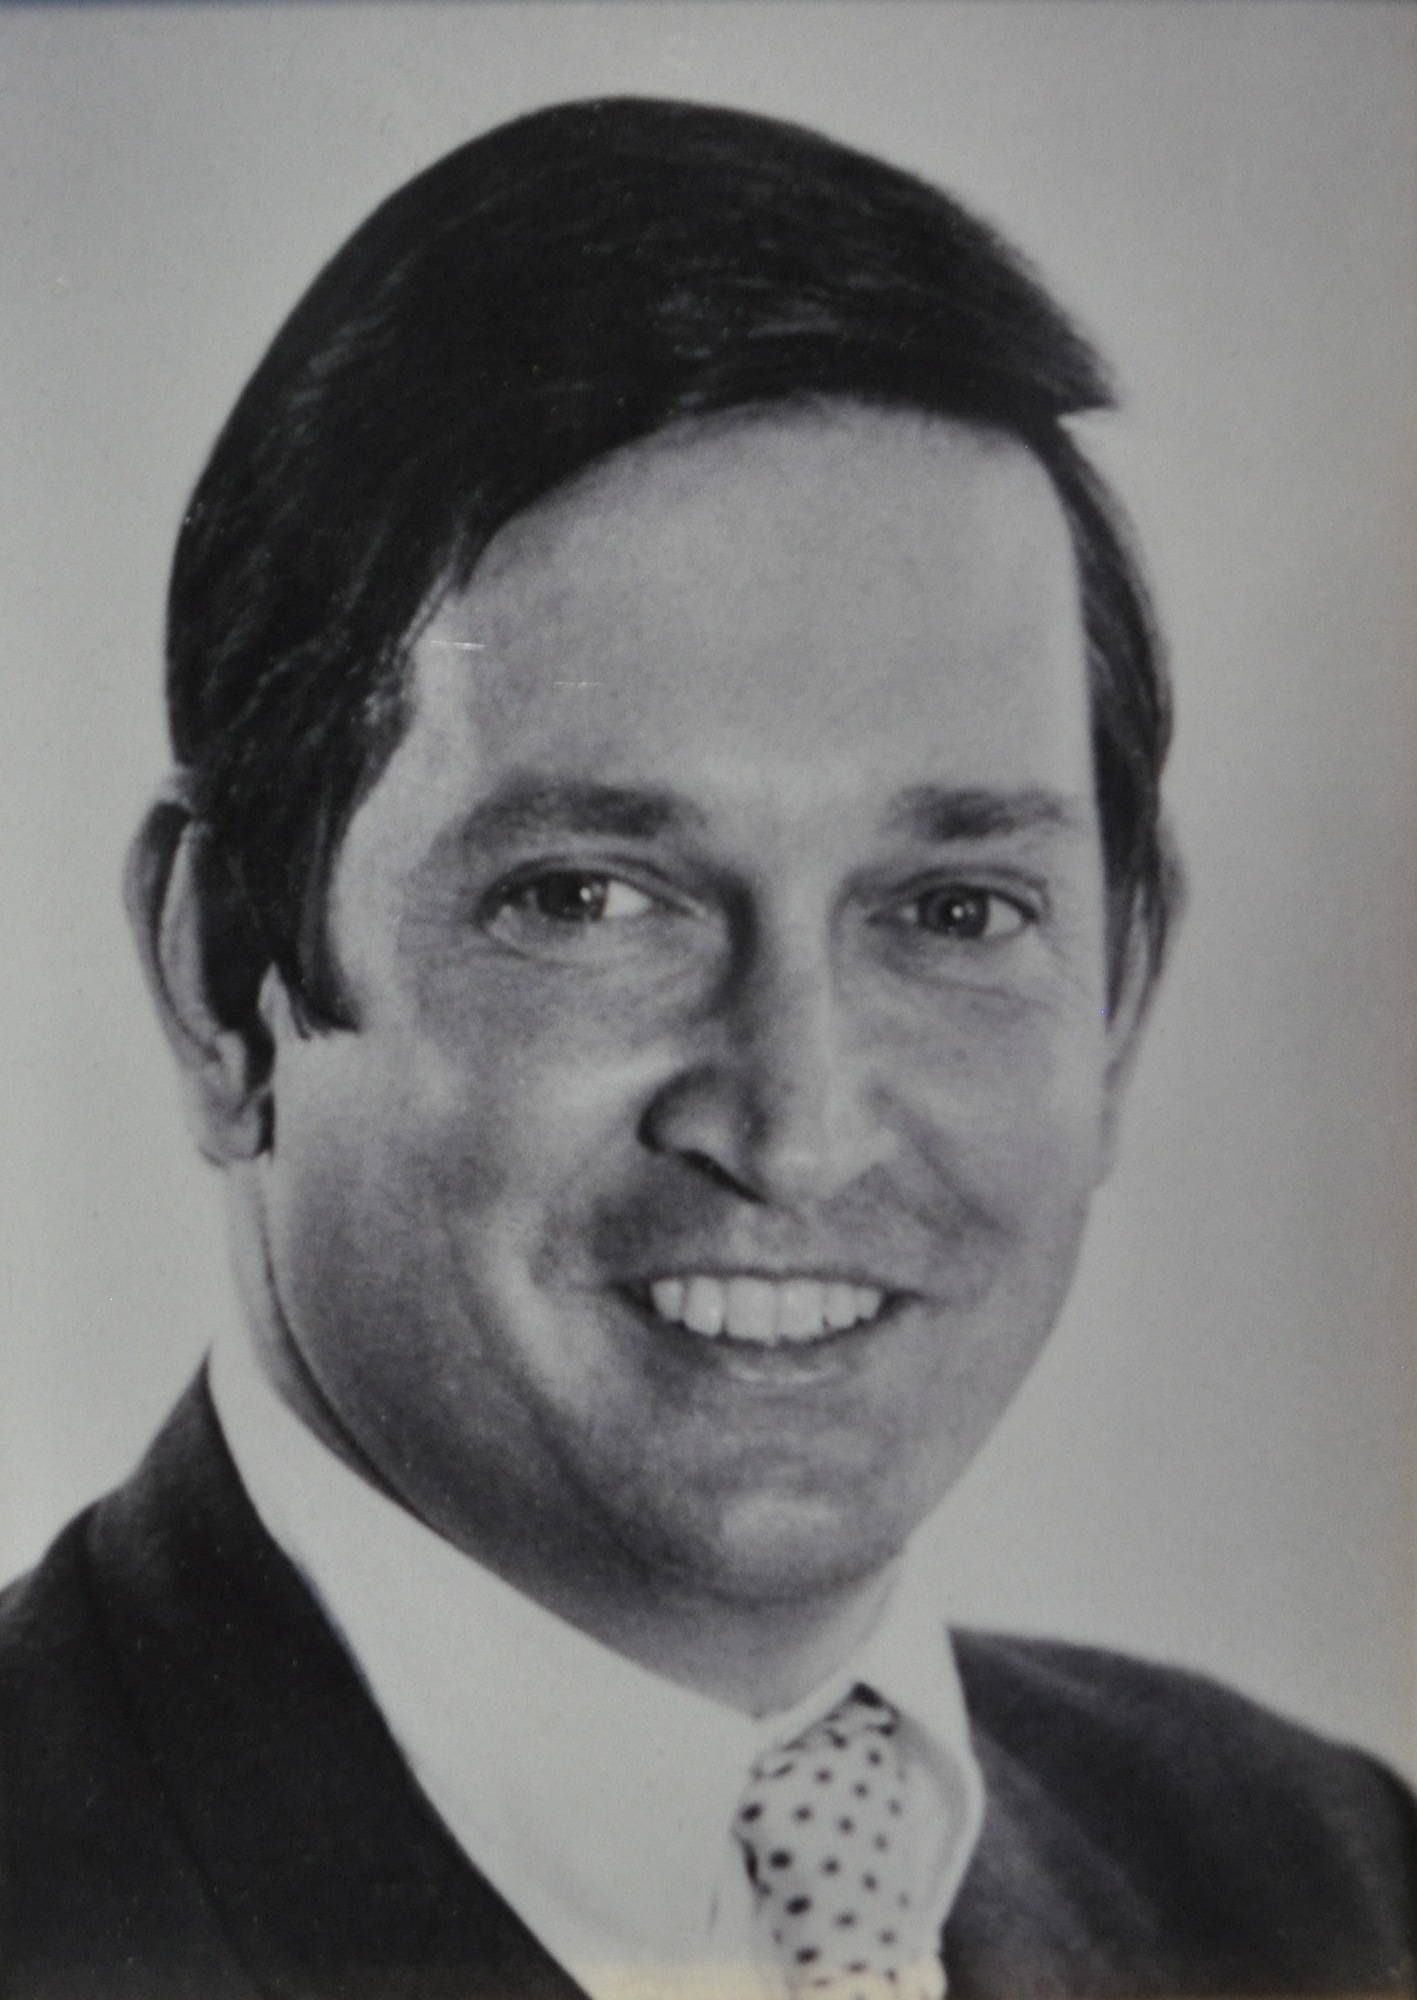 Kerry Kirschner served as Sarasota’s mayor in 1986-87 and 1990-91.